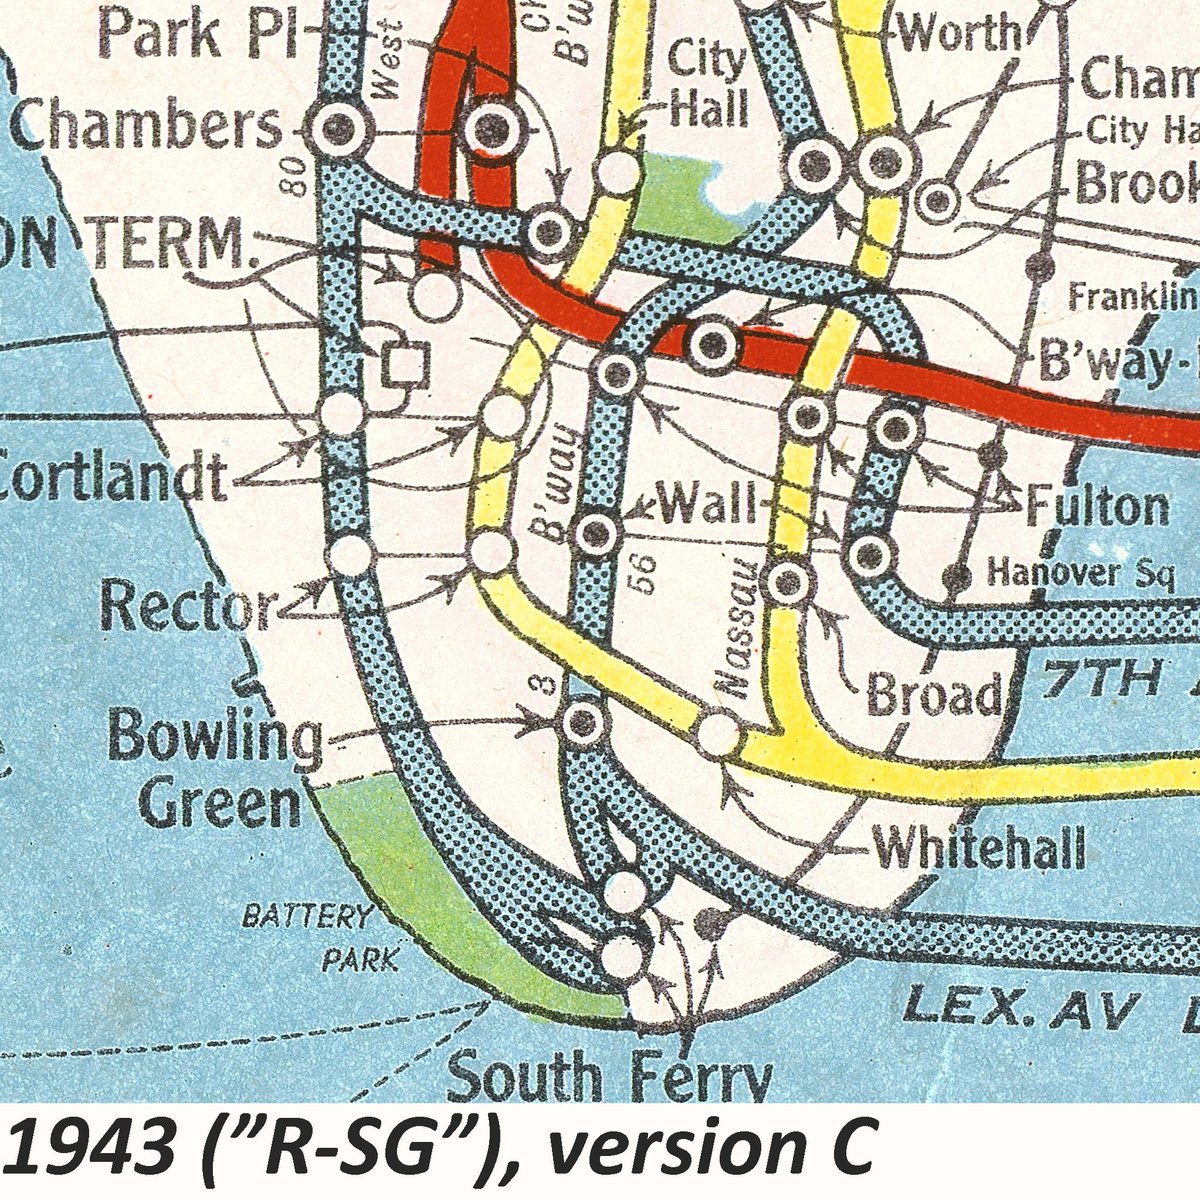 The first of the Hagstrom subway maps to be issued as the official pocket map in 1943/44 was printed in three versions. 'A' had orange BMT, 'B' and 'C' had yellow BMT; while 'A' and 'B' had a different cartouche from that of 'C'.